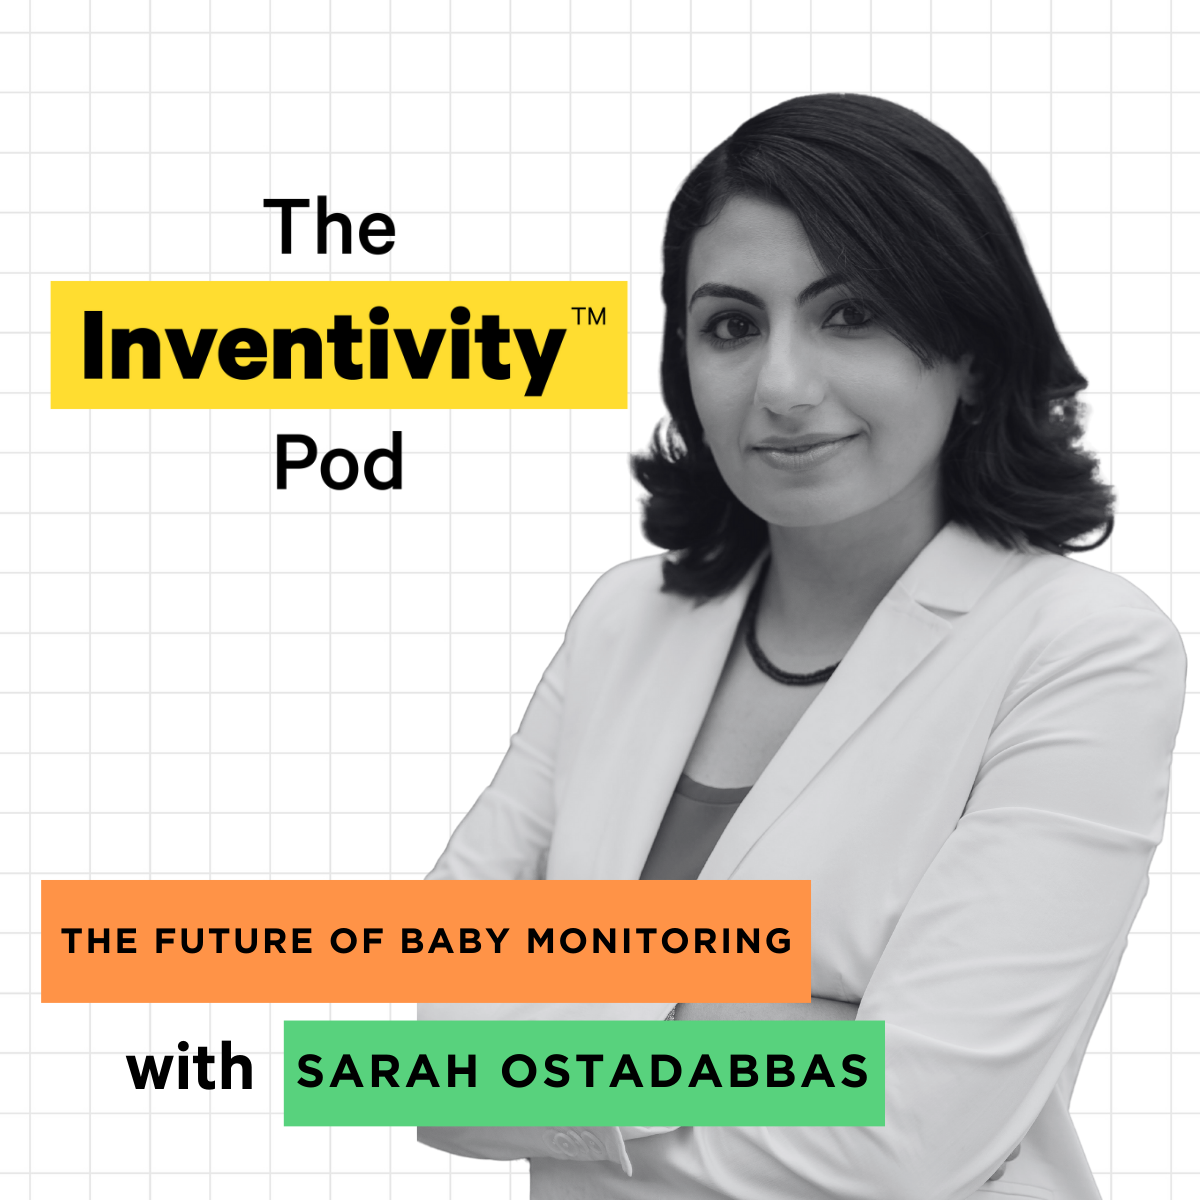 The Future of Baby Monitoring with Sarah Ostadabbas